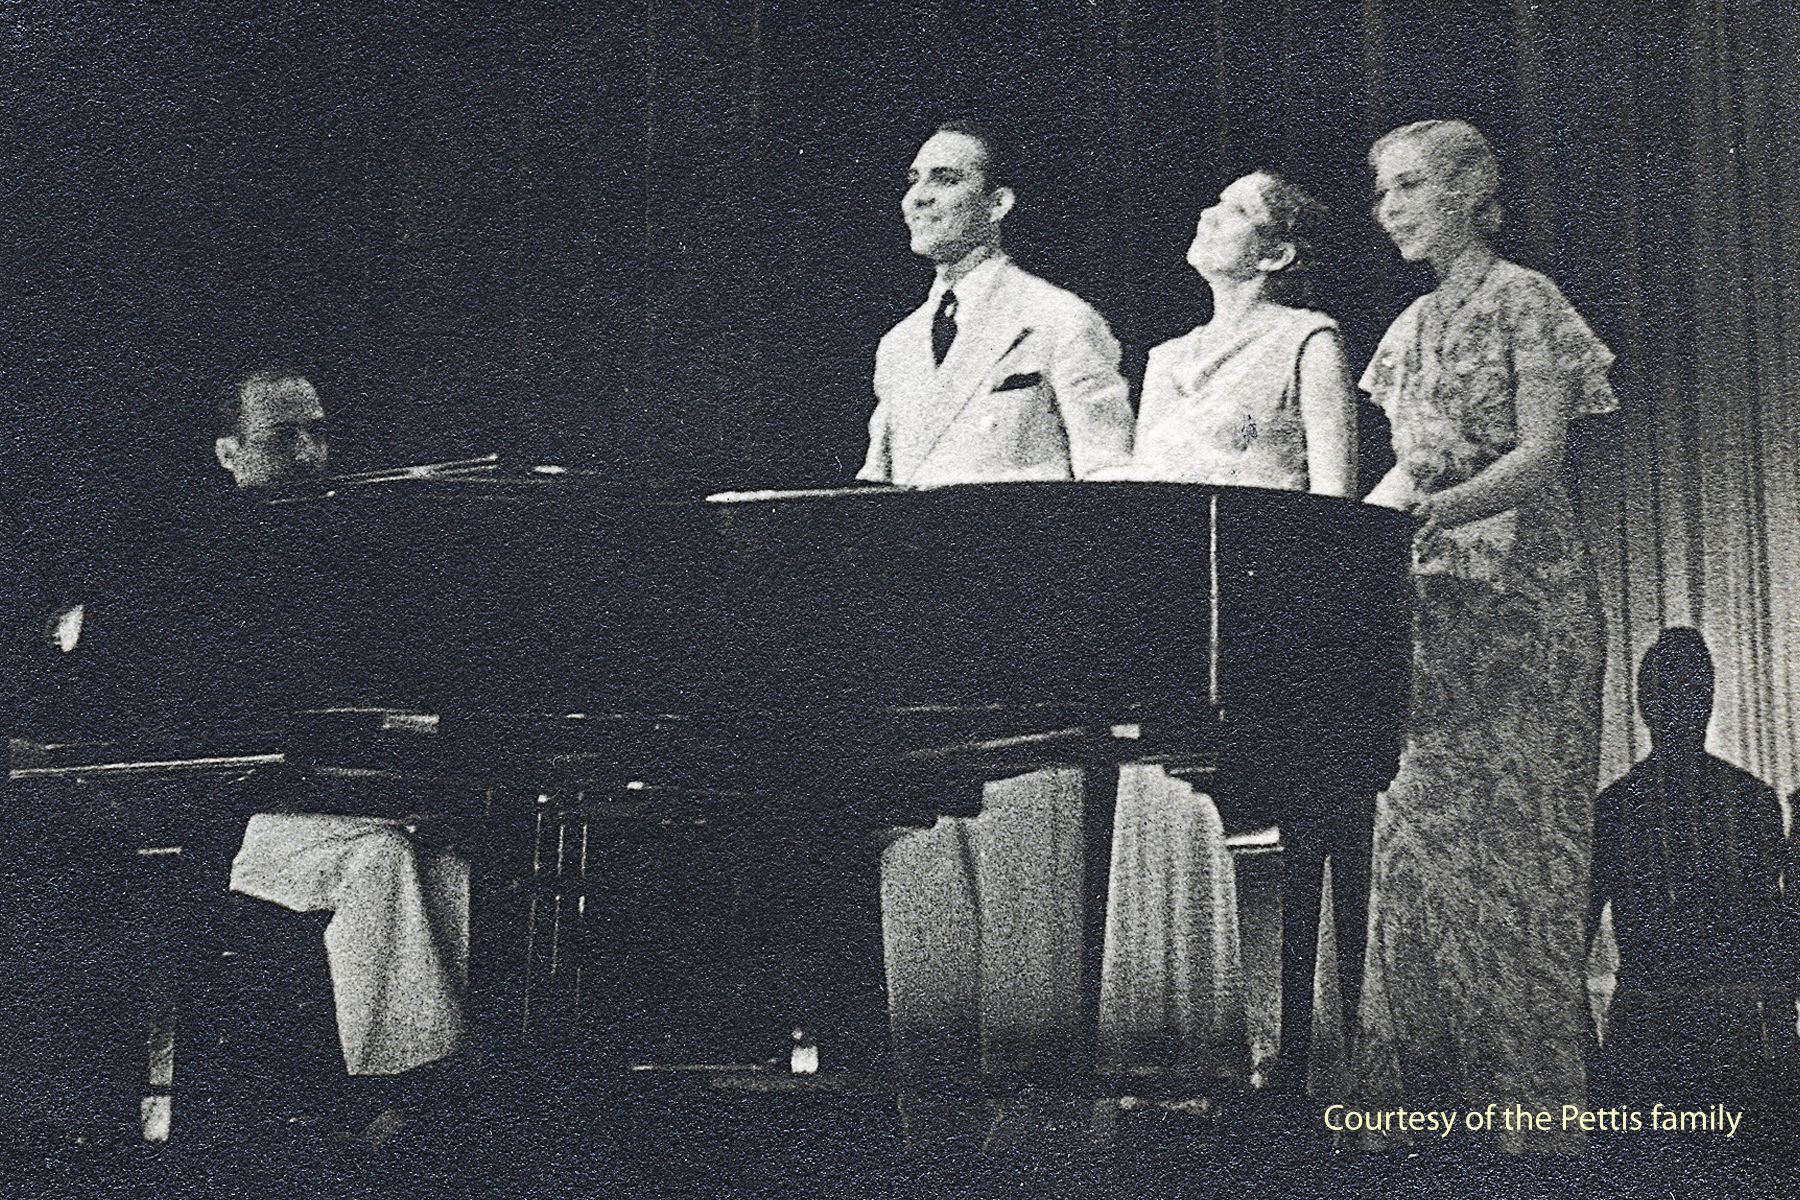 On stage beside the piano - 1936